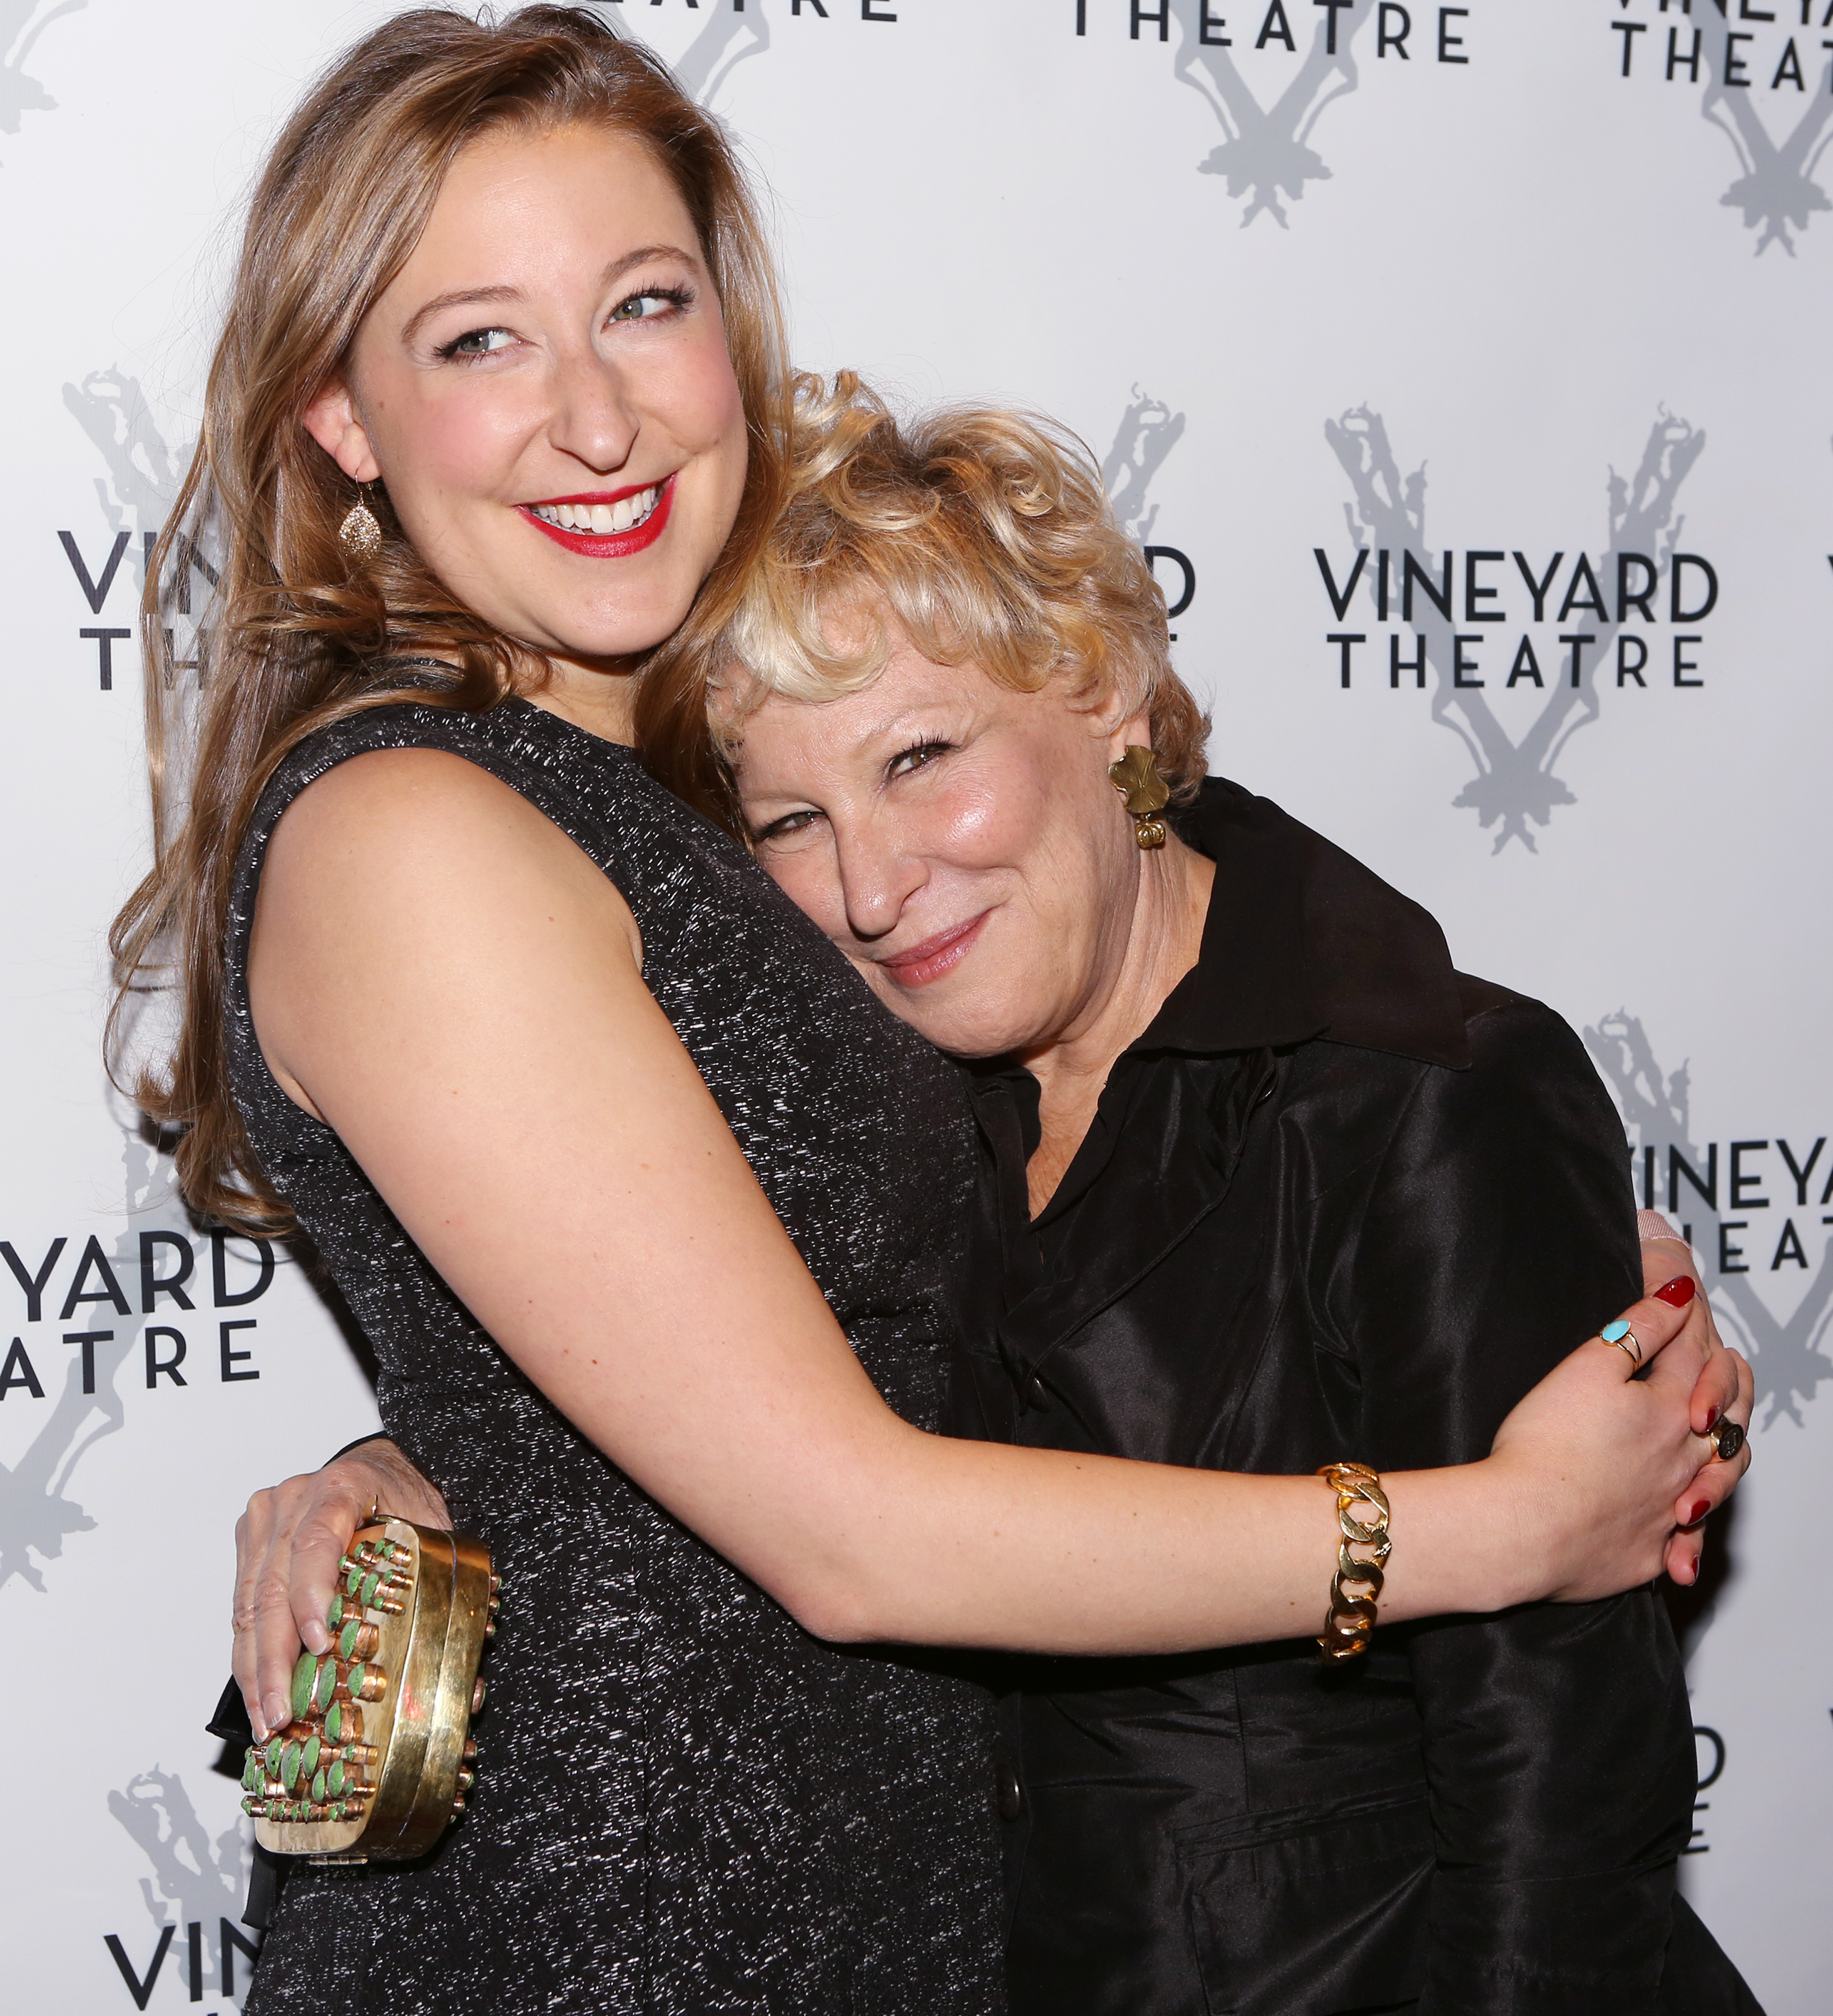 Sophie von Haselberg and mom Bette Midler attend the Off-Broadway opening night performance after-party for "Billy & Ray" at the Vineyard Theatre on October 20, 2014 in New York City. | Source: Getty Images